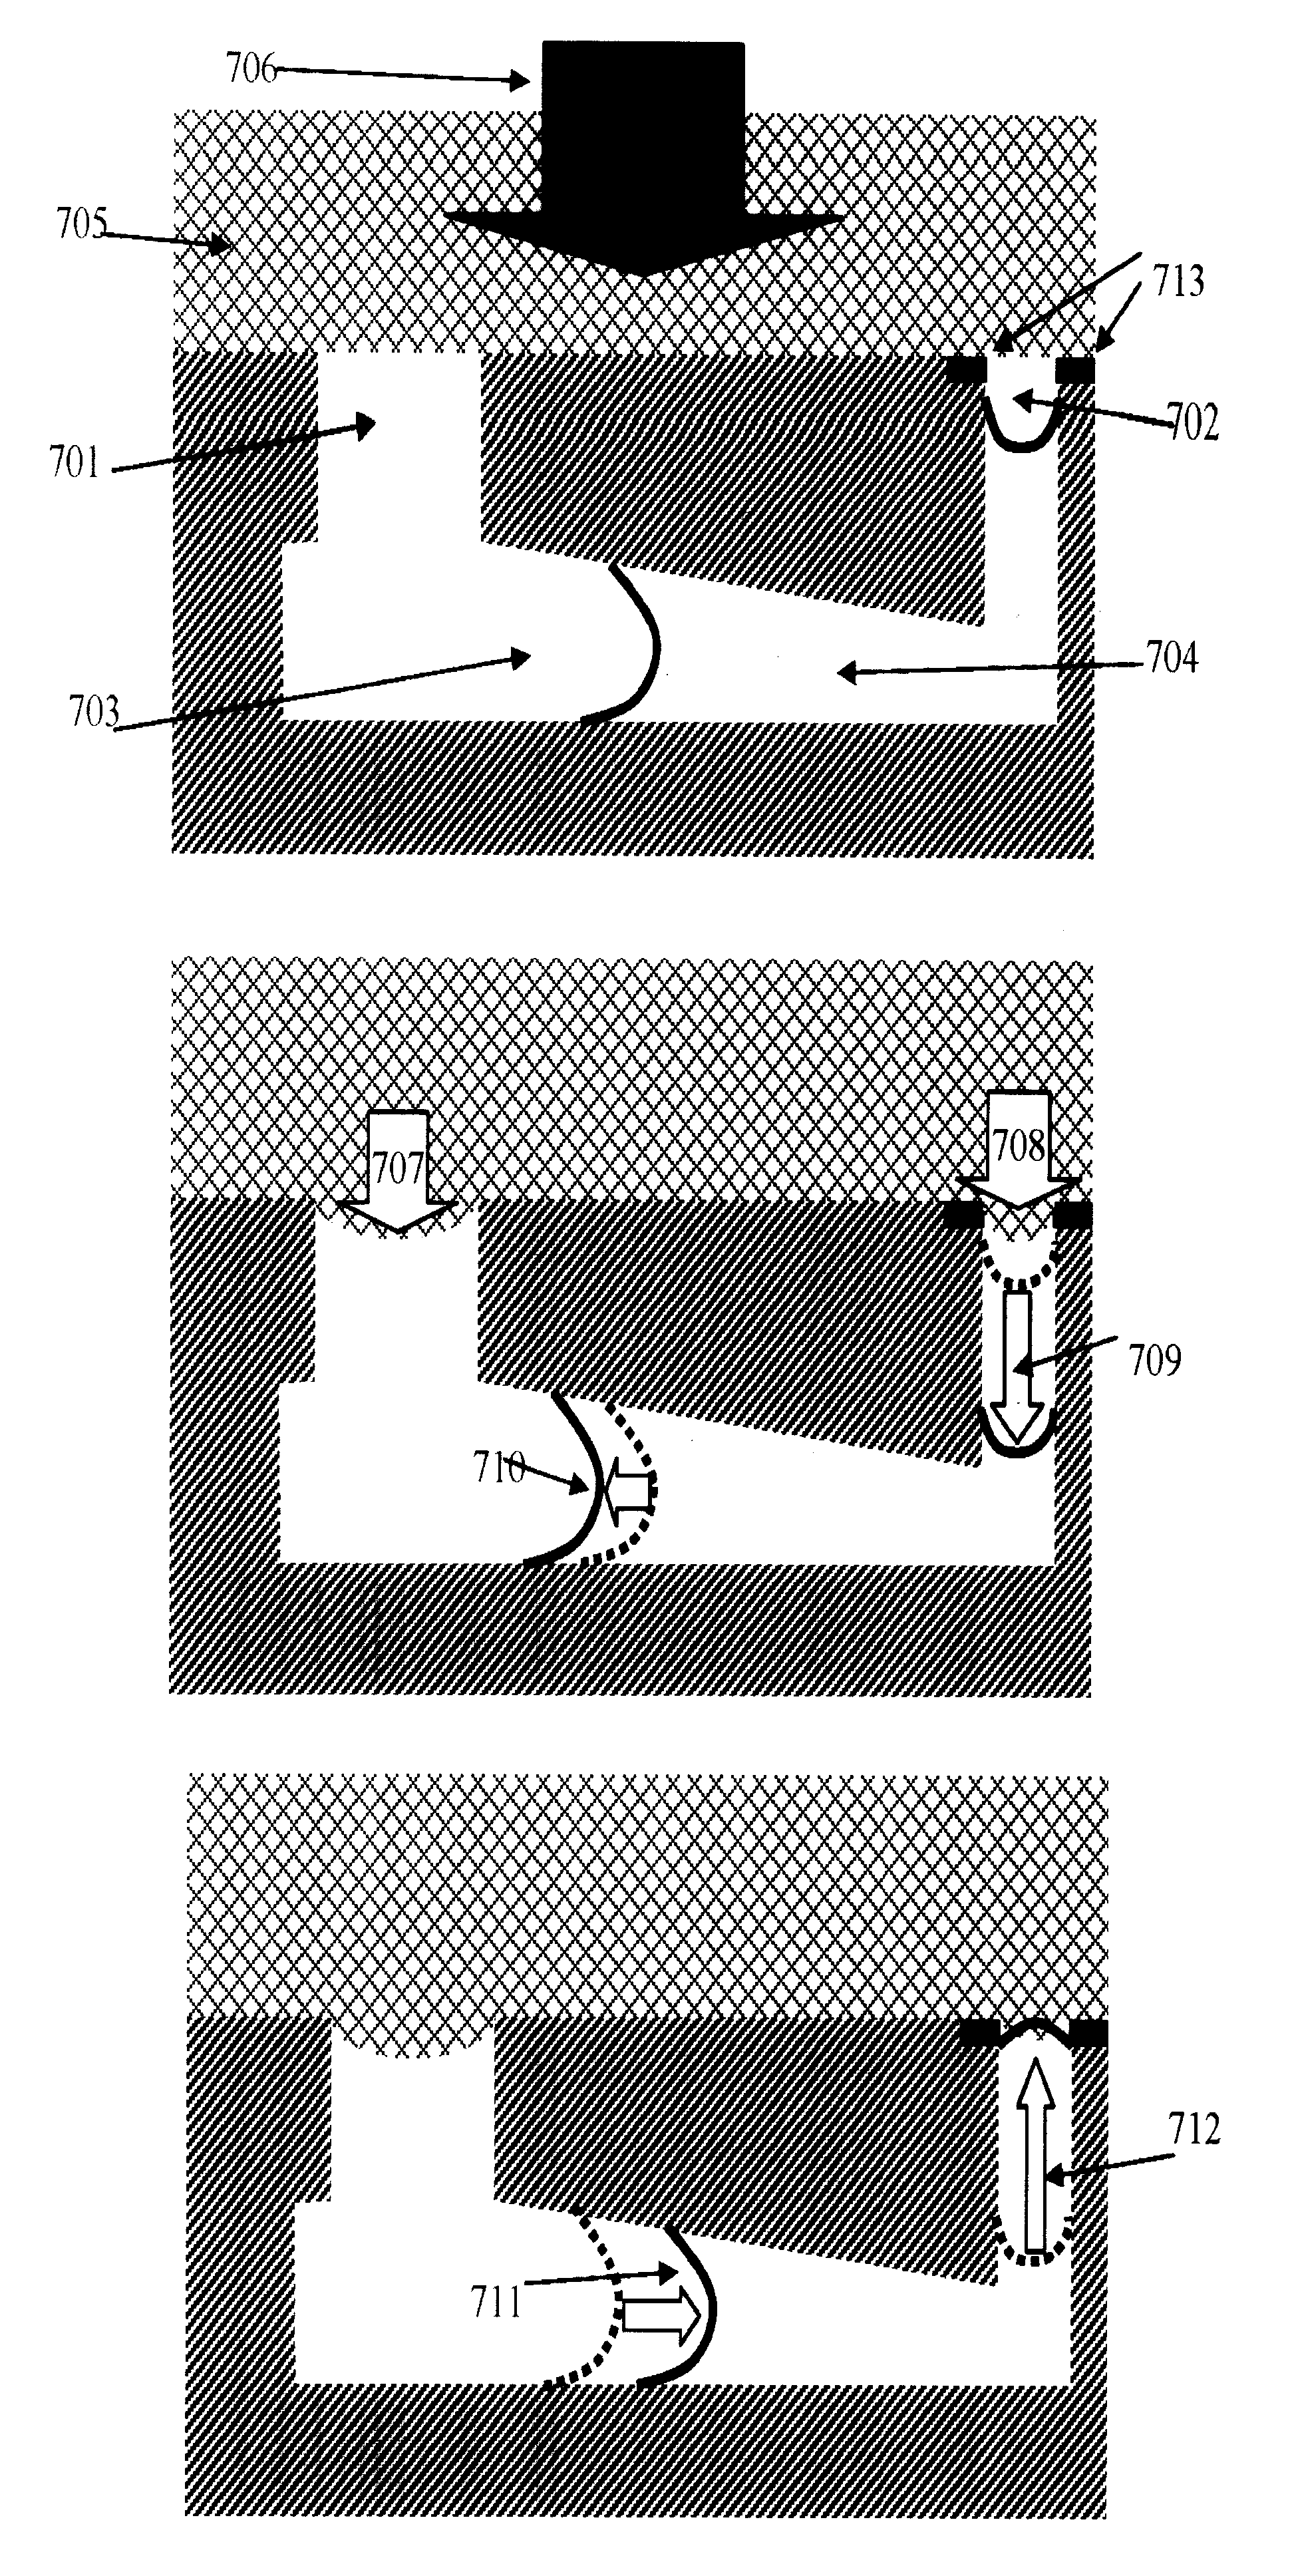 Components for nano-scale Reactor